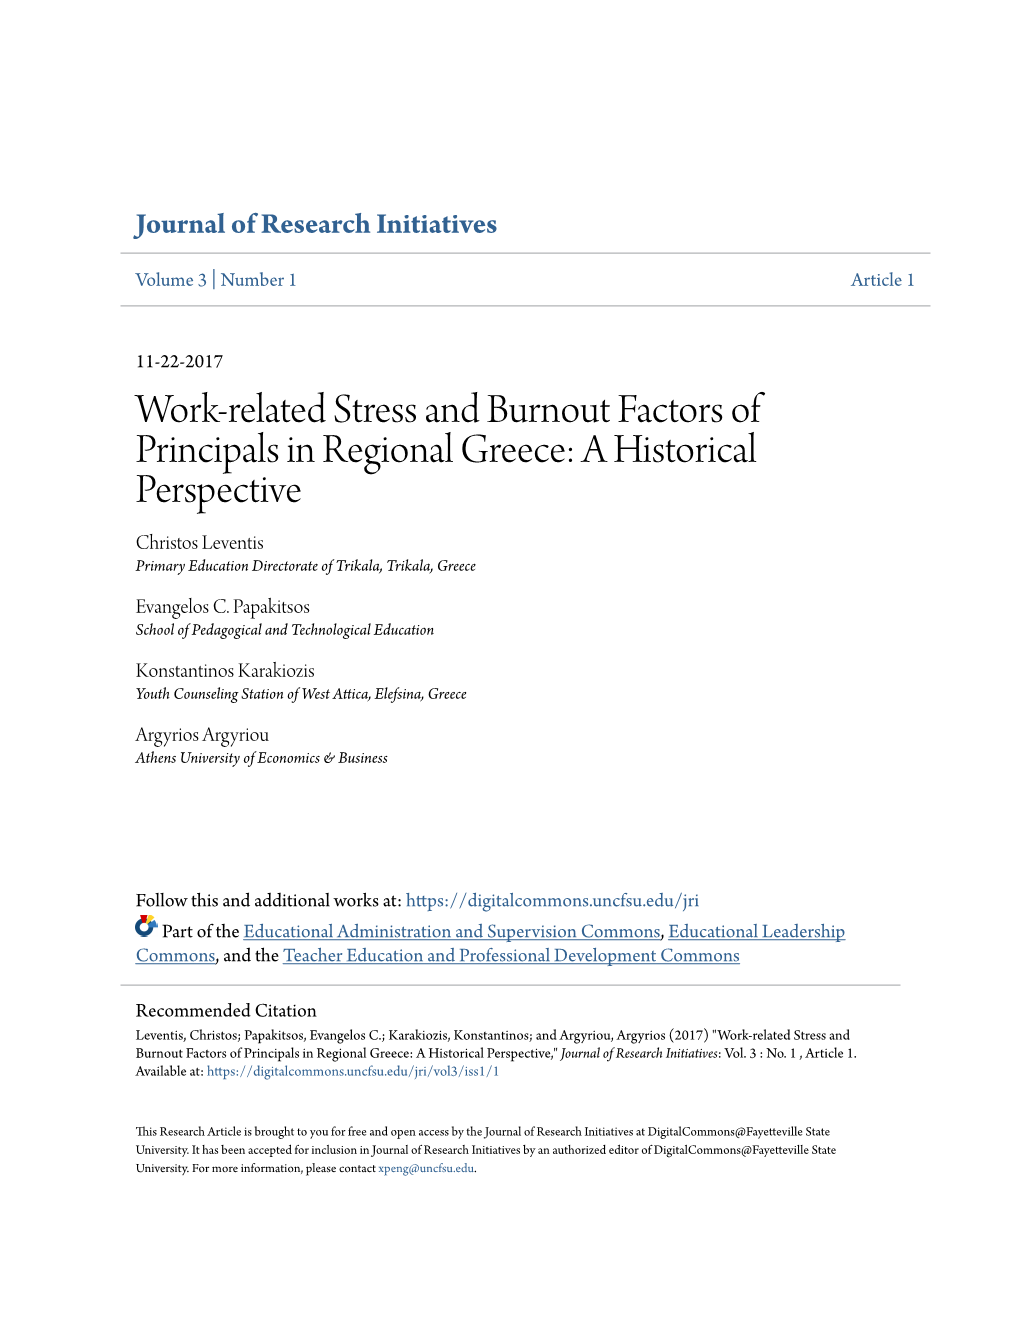 Work-Related Stress and Burnout Factors of Principals in Regional